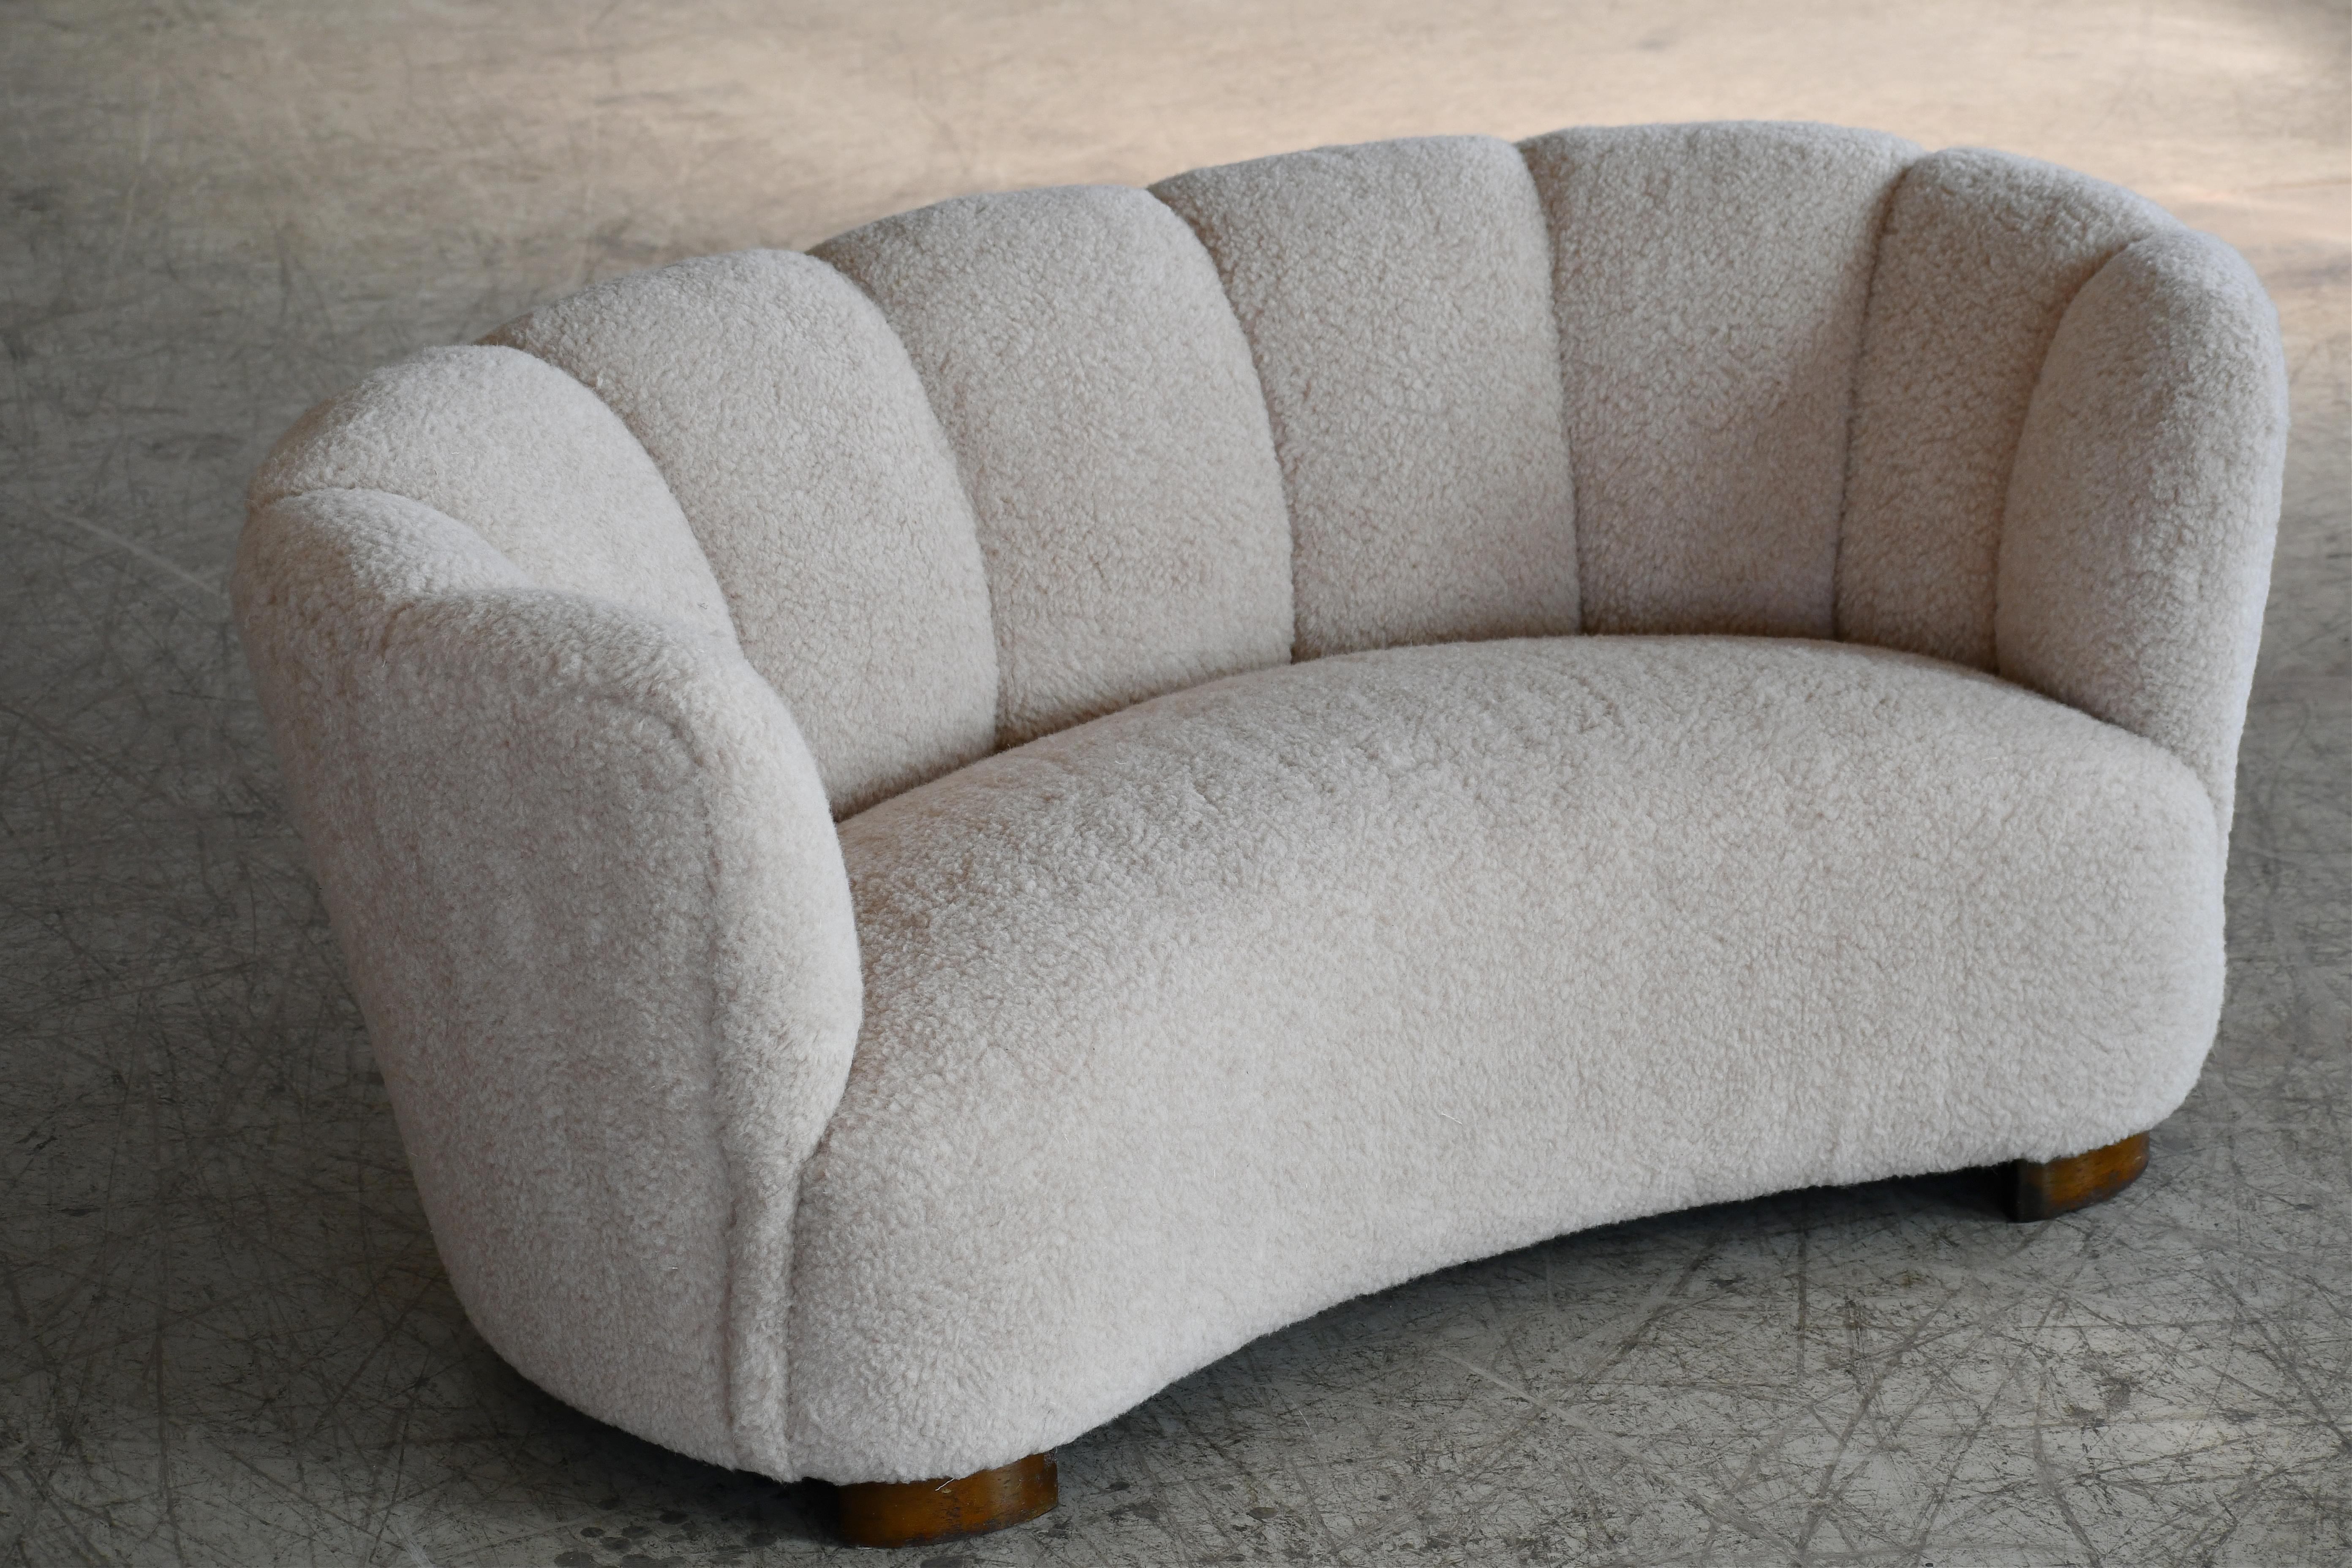 Mid-20th Century Danish 1940's Banana Shaped Curved Loveseat or Sofa Covered in Beige Lambswool